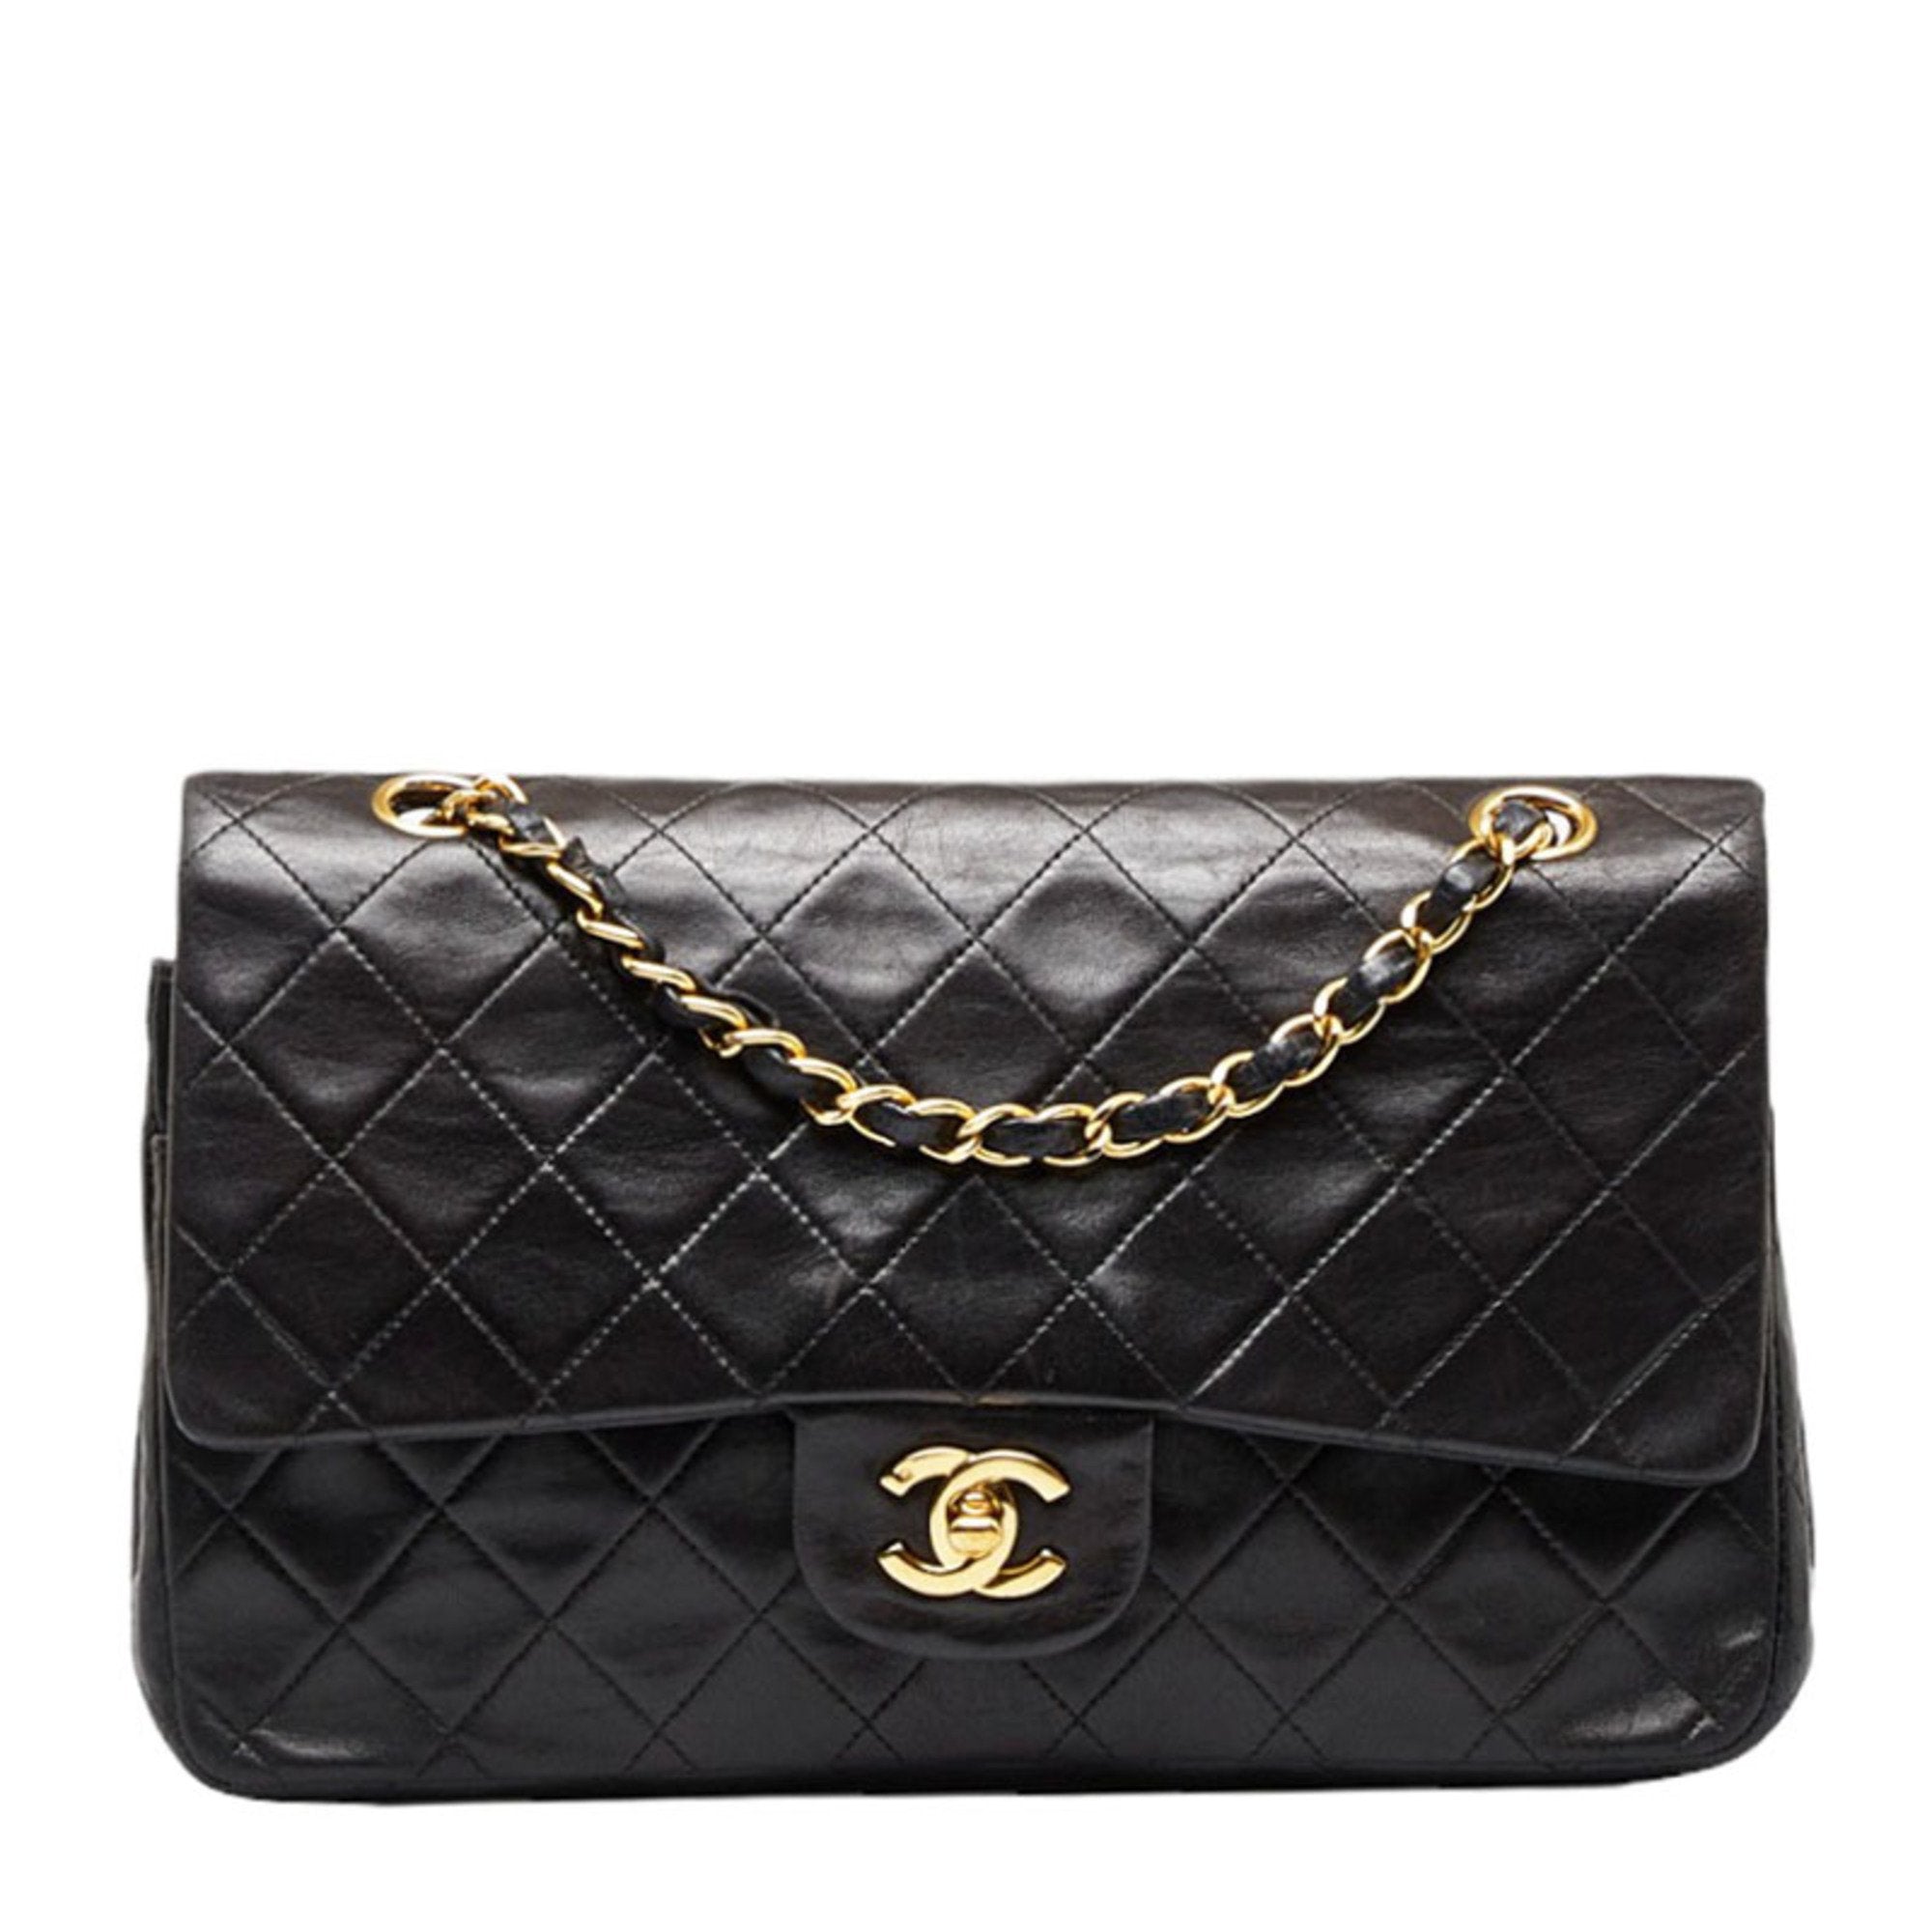 Auth CHANEL Double Flap Black Quilted Leather Gold Chain Shoulder